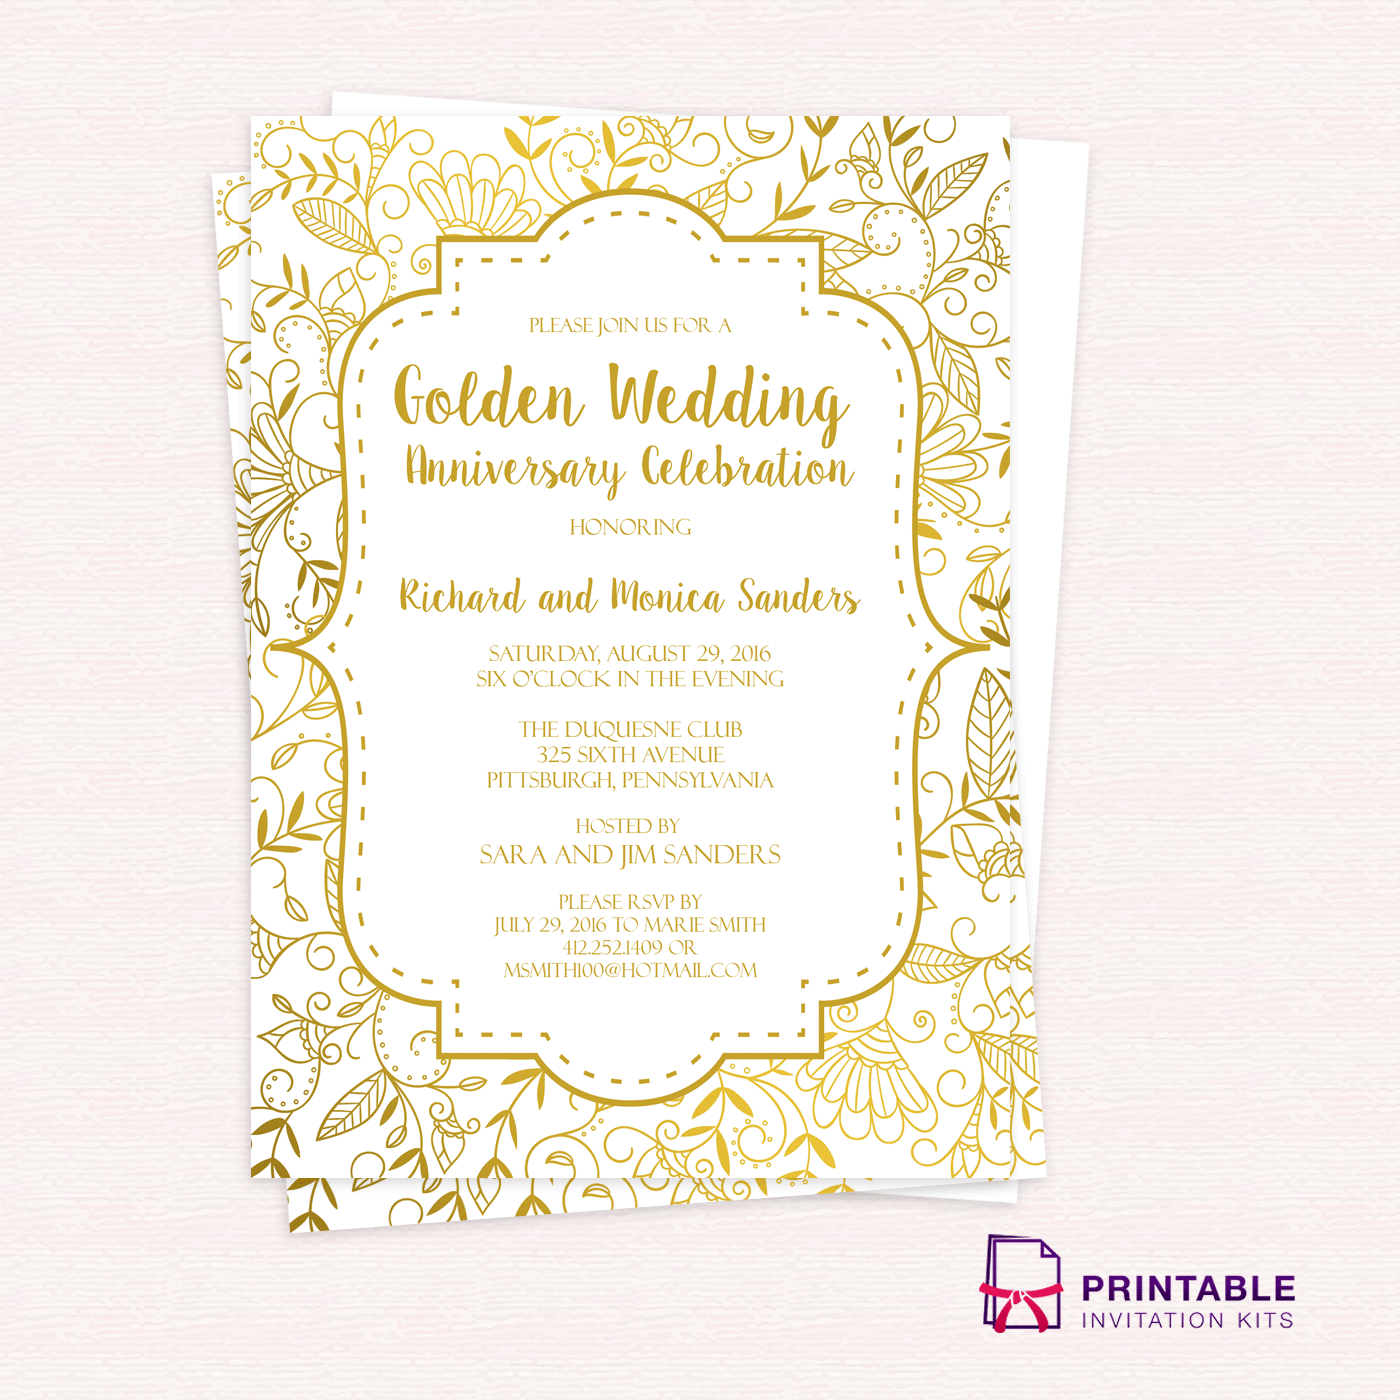 Golden Wedding Anniversary Invitation Template 50th Wedding throughout dimensions 1400 X 1400